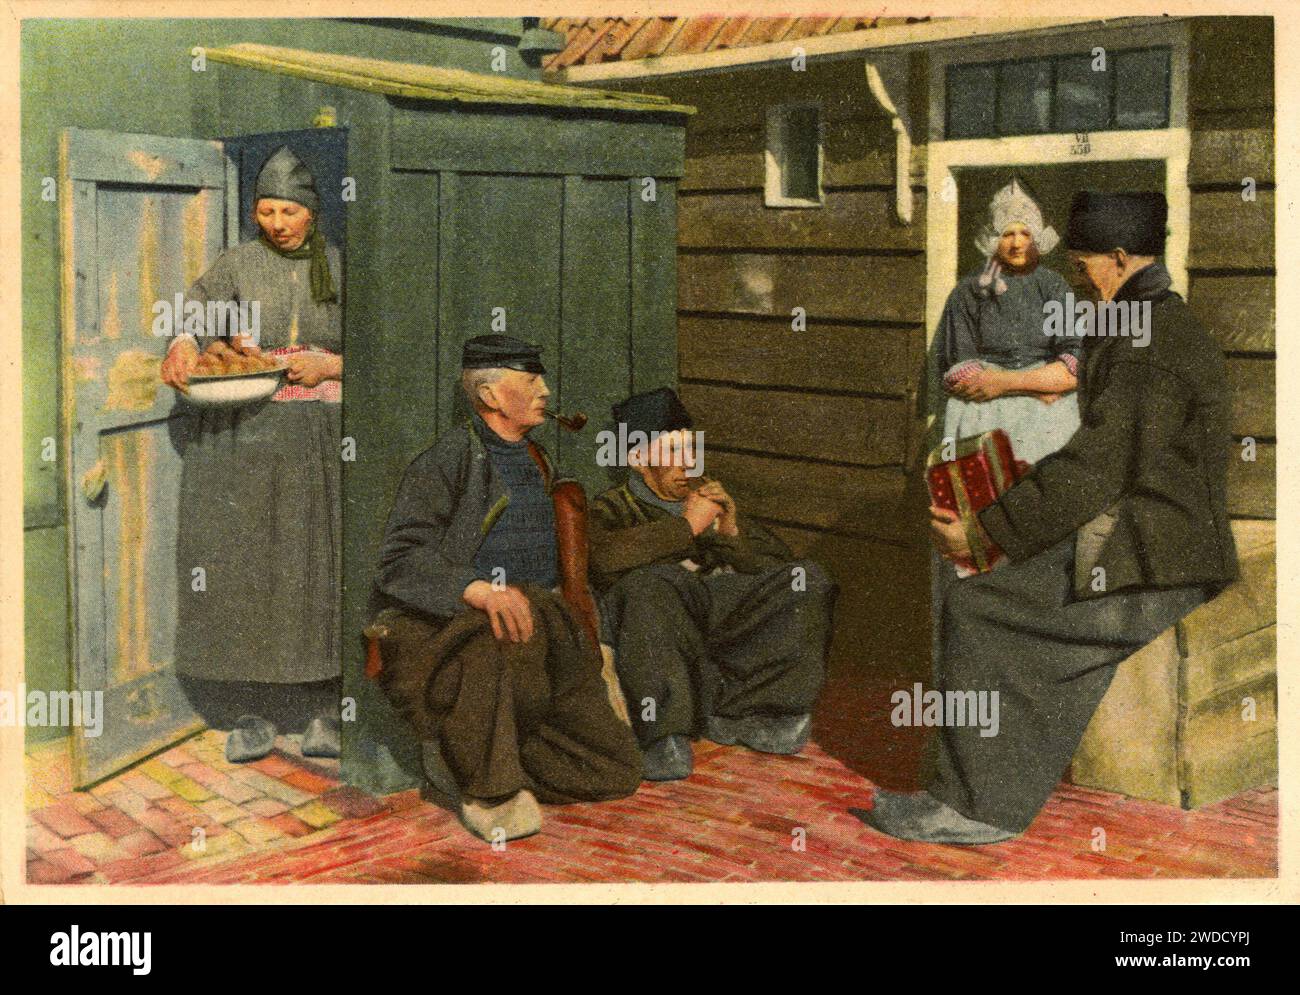 A Bensdorp Chocolate advertisting postcard showing people in traditional Dutch clothing. Stock Photo